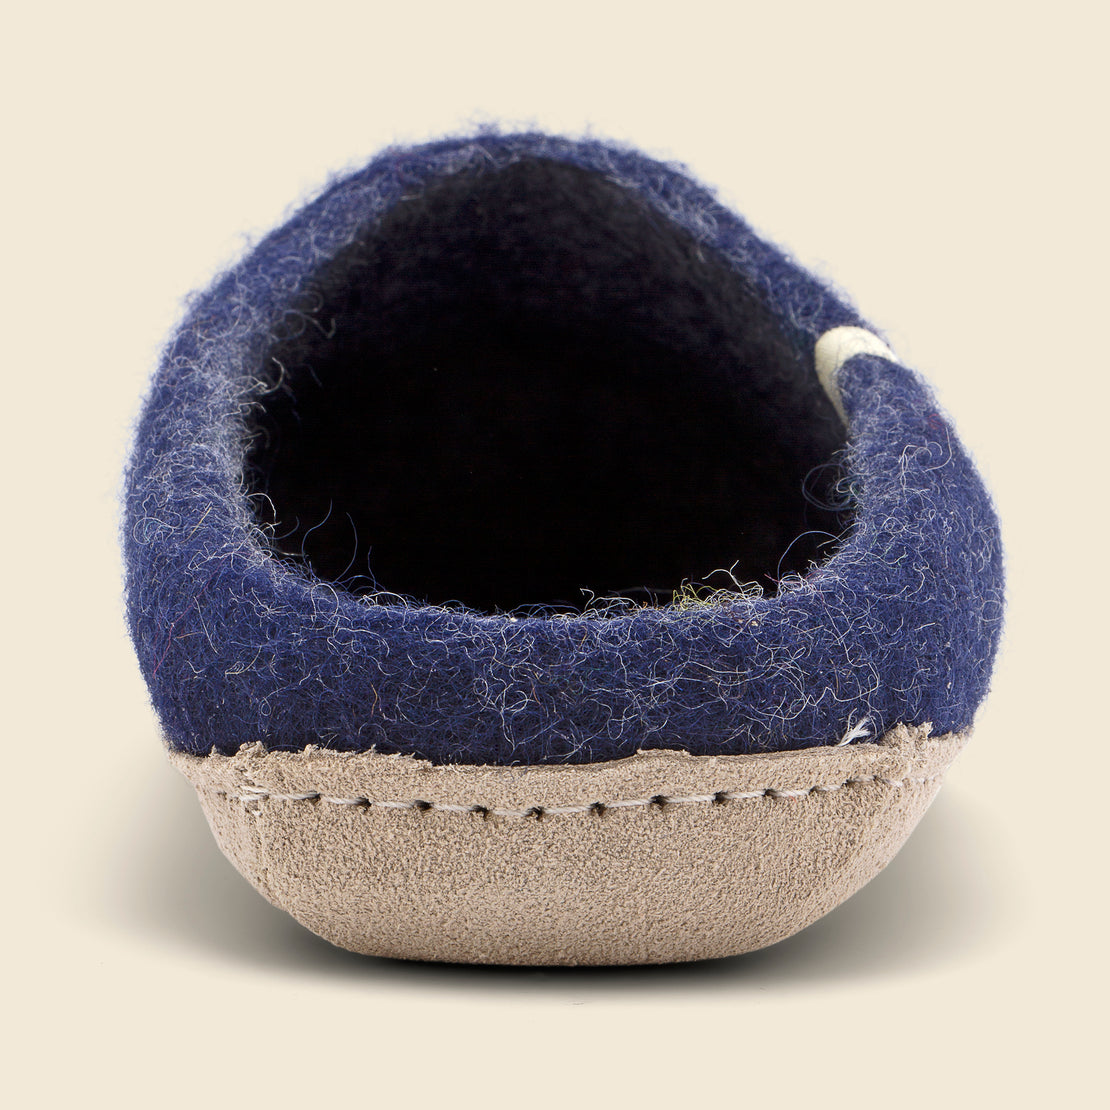 Wool Slippers - Blue - EGOS COPENHAGEN - STAG Provisions - Home - Bed - Slipper